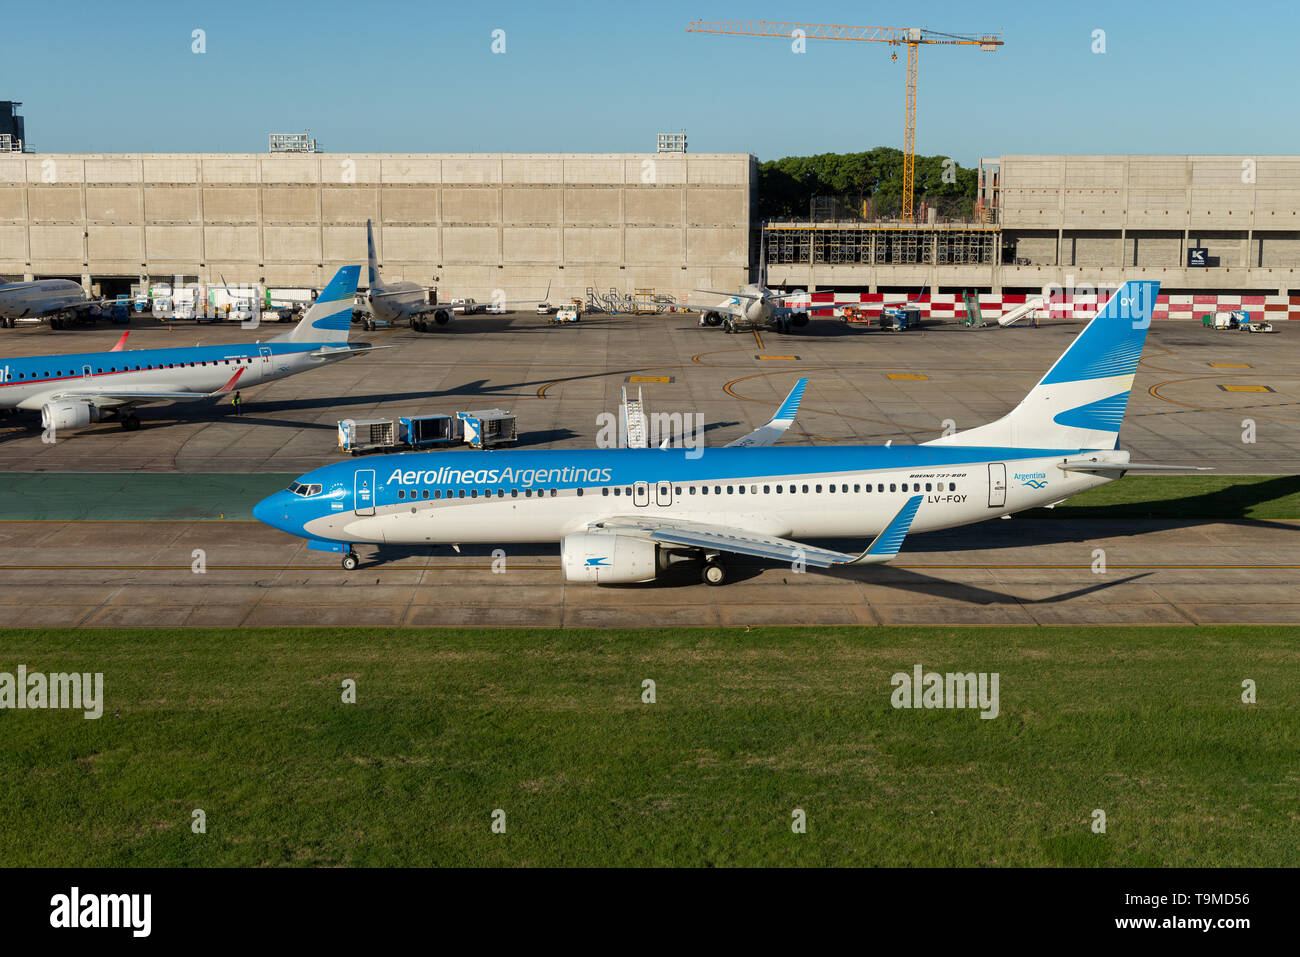 Boeing 737-800 with registration LV-FQY taxiing to the runway at Aeroparque Jorge Newbery. Jorge Newbery Airfield (Spanish: Aeroparque 'Jorge Newbery' Stock Photo